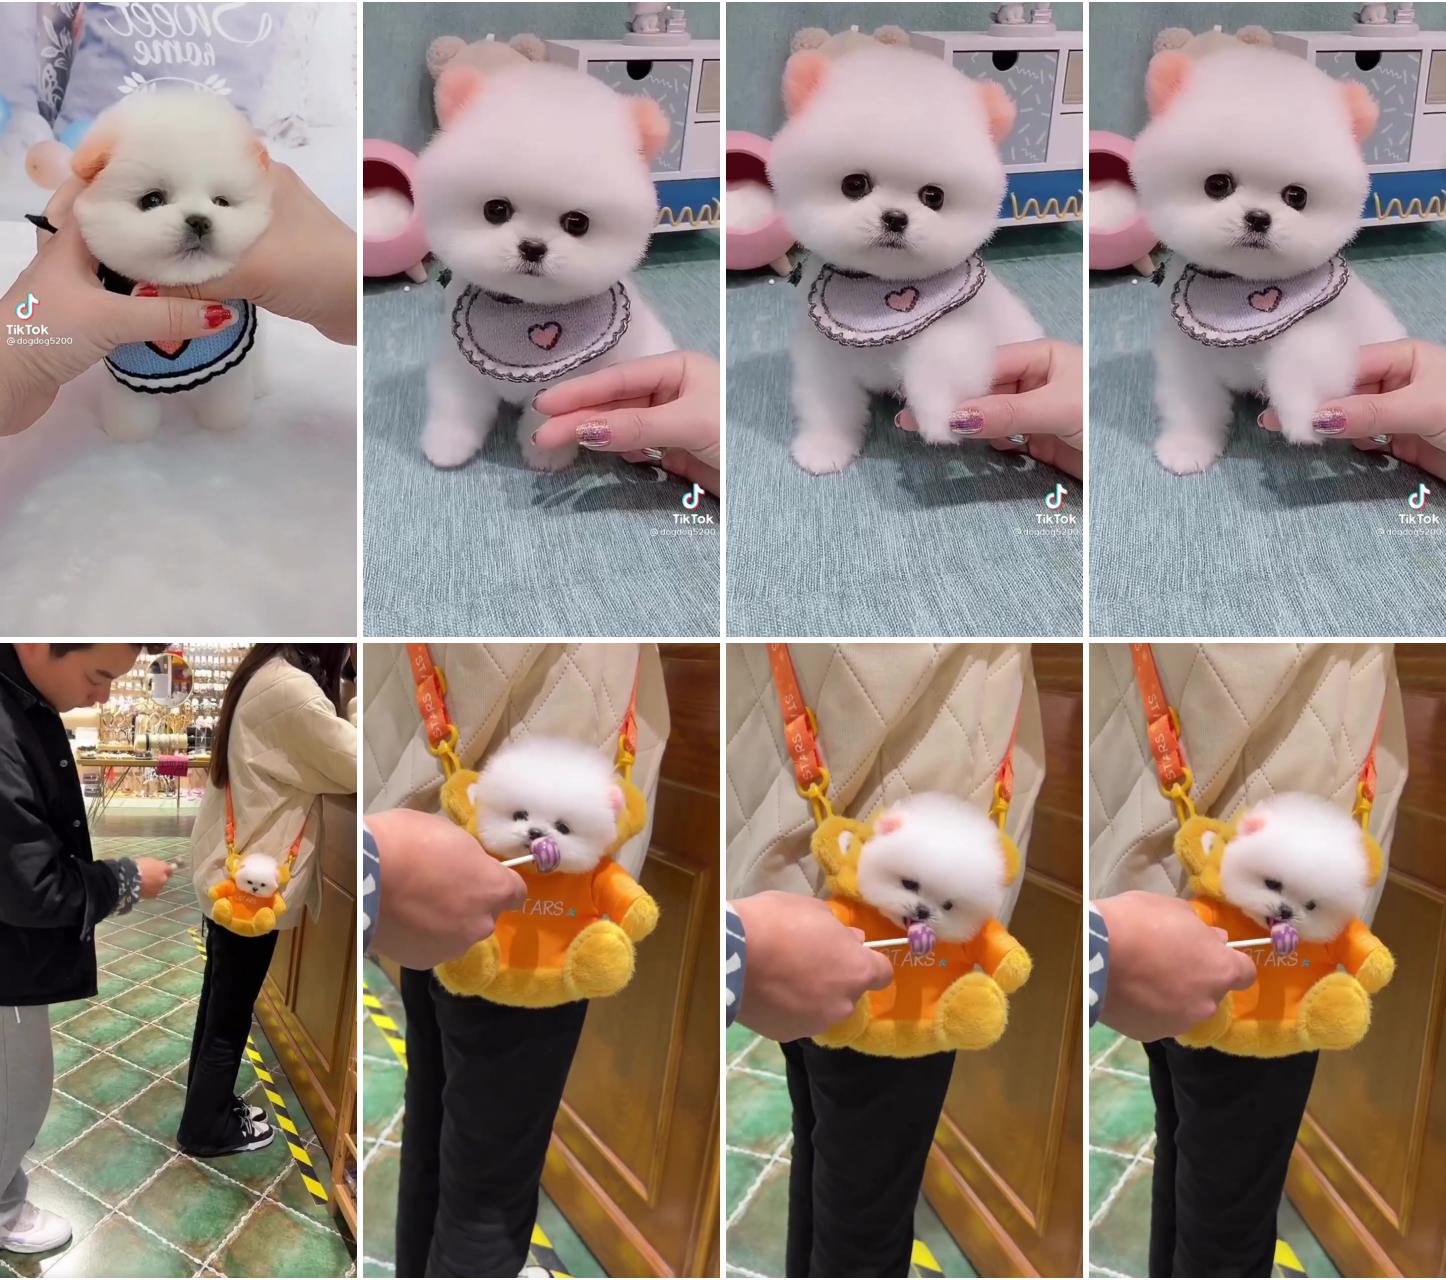 So cute pomeranian puppy ; when did you realize it was a puppy